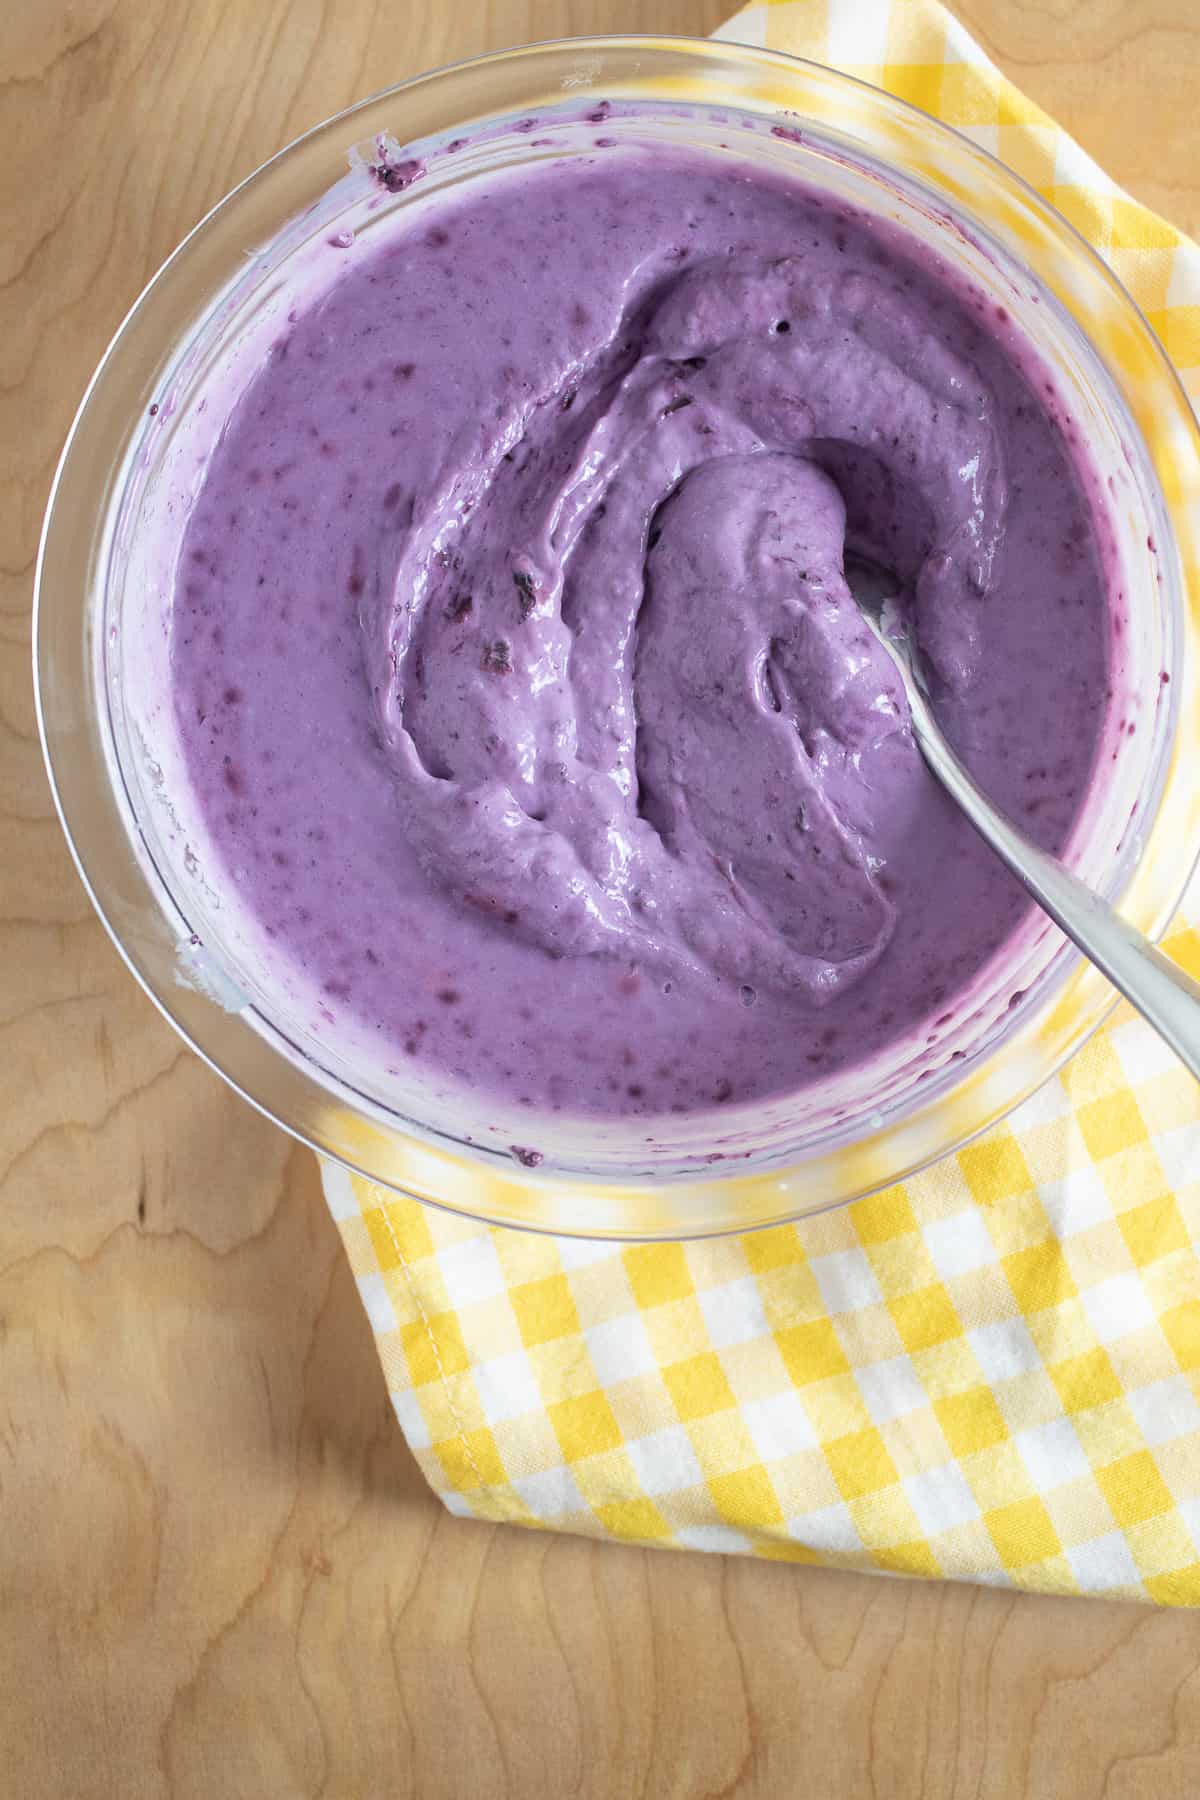 The chilled ice cream mixture is a rich purple color and sits on a light wooden surface in a glass bowl on top of a yellow checked napkin.